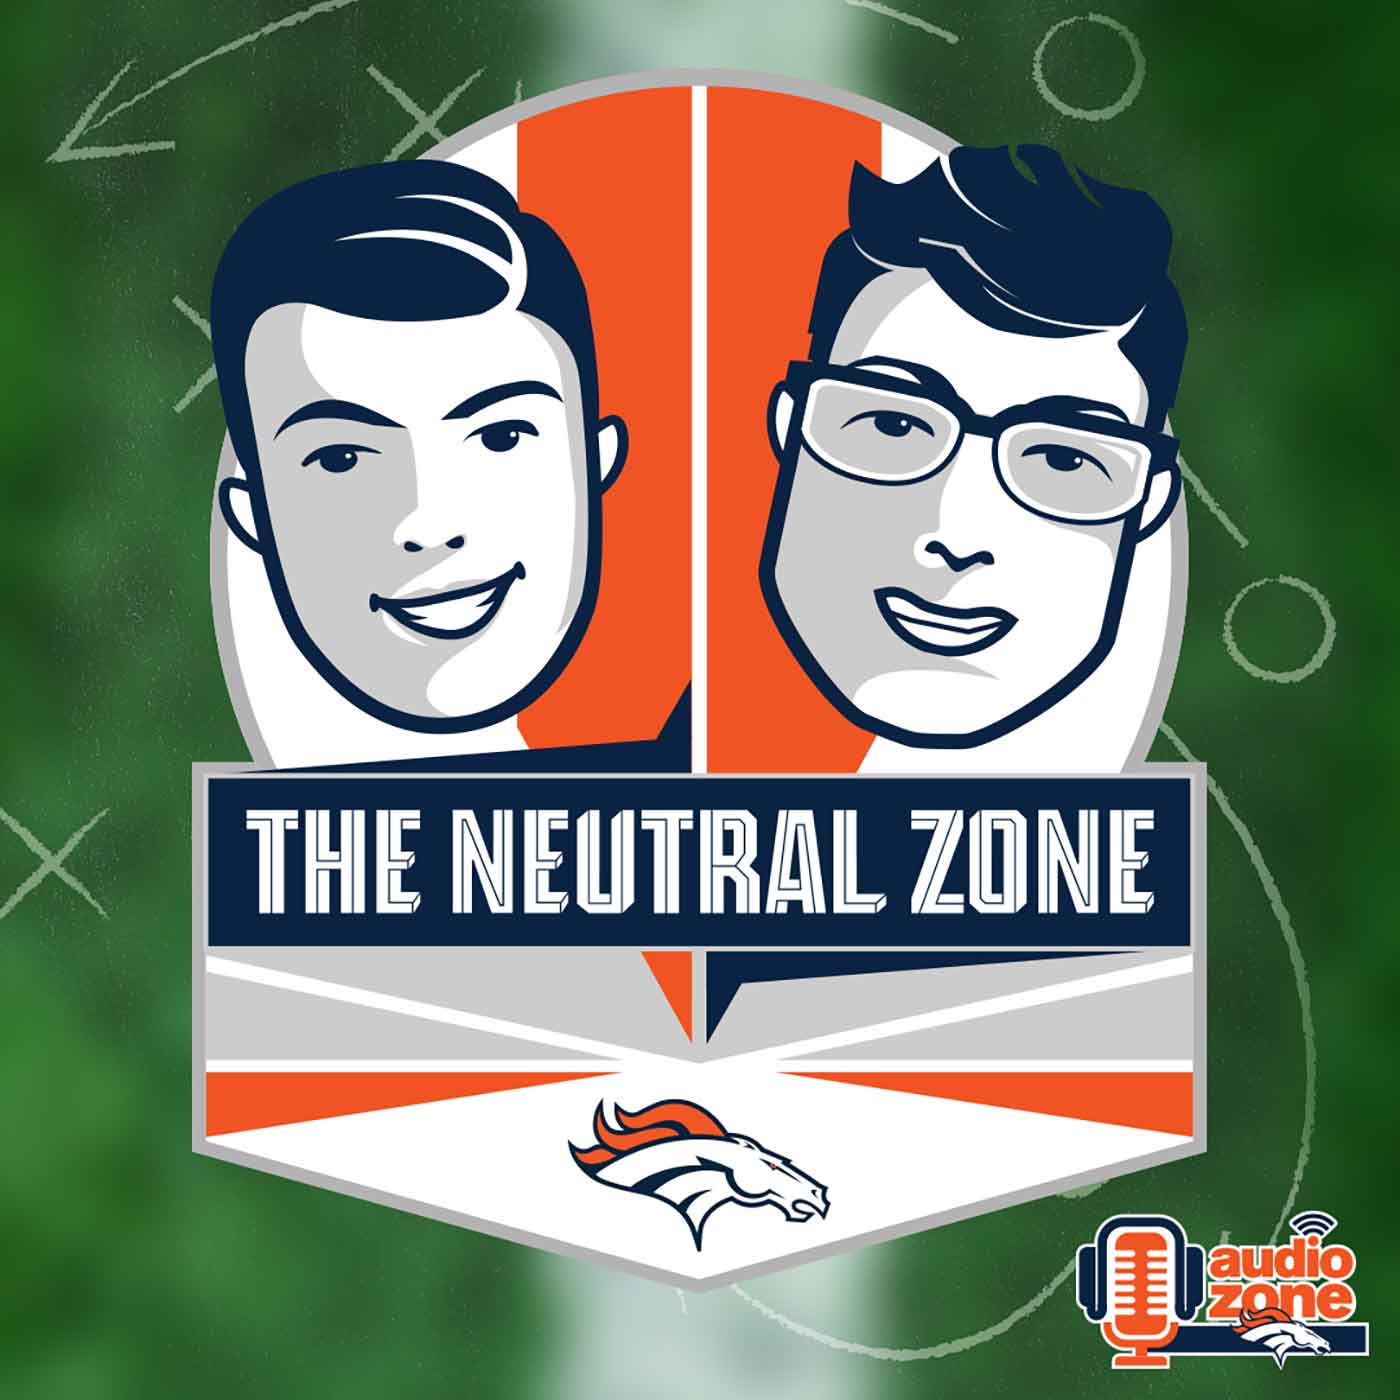 The Neutral Zone (Ep. 174): What’s next for the Broncos after a three-game skid?